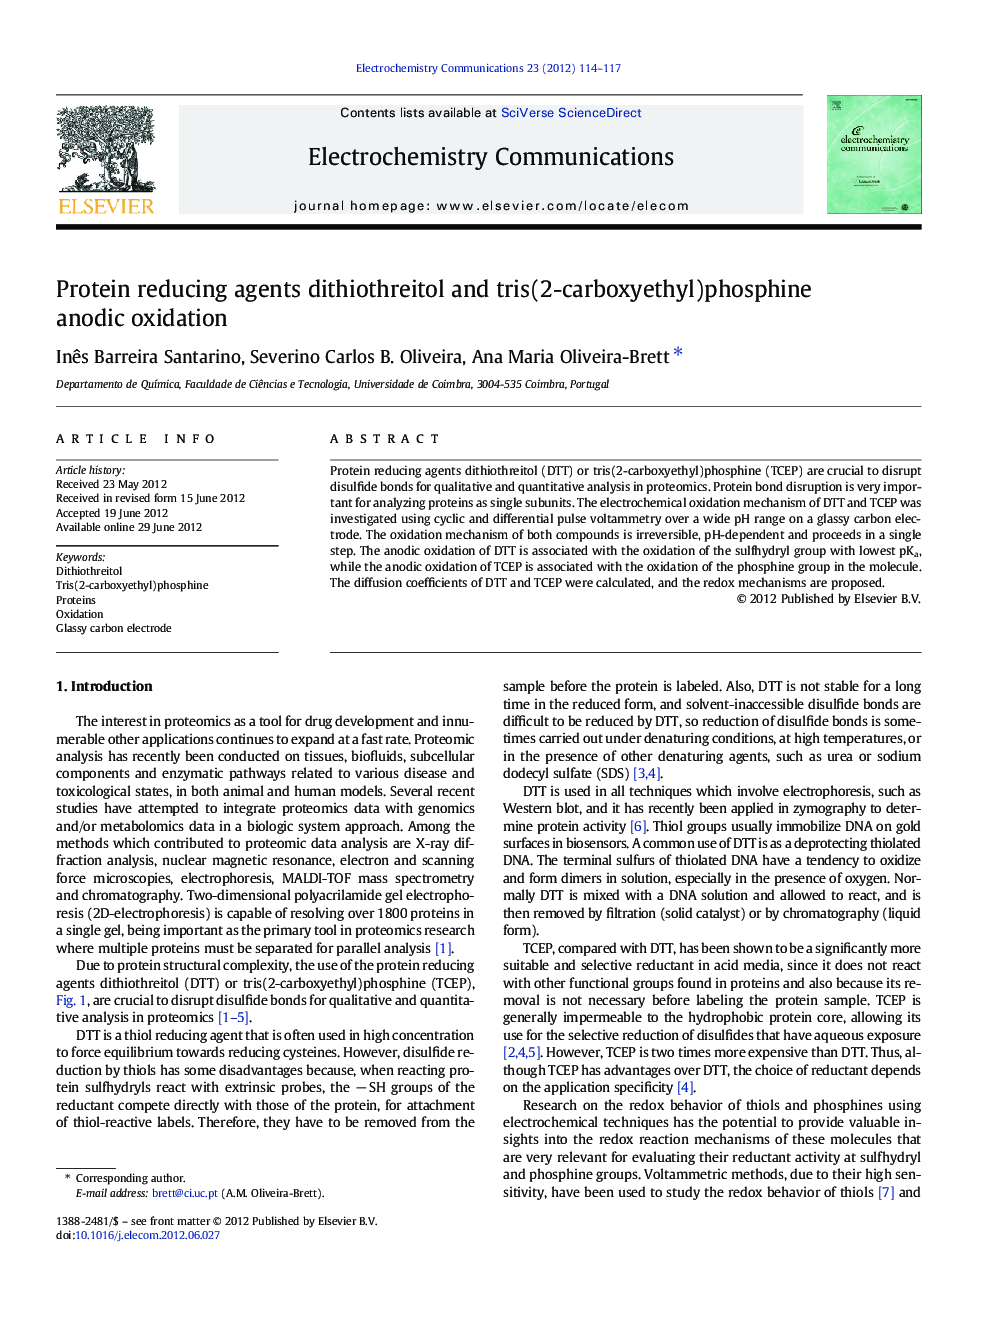 Protein reducing agents dithiothreitol and tris(2-carboxyethyl)phosphine anodic oxidation